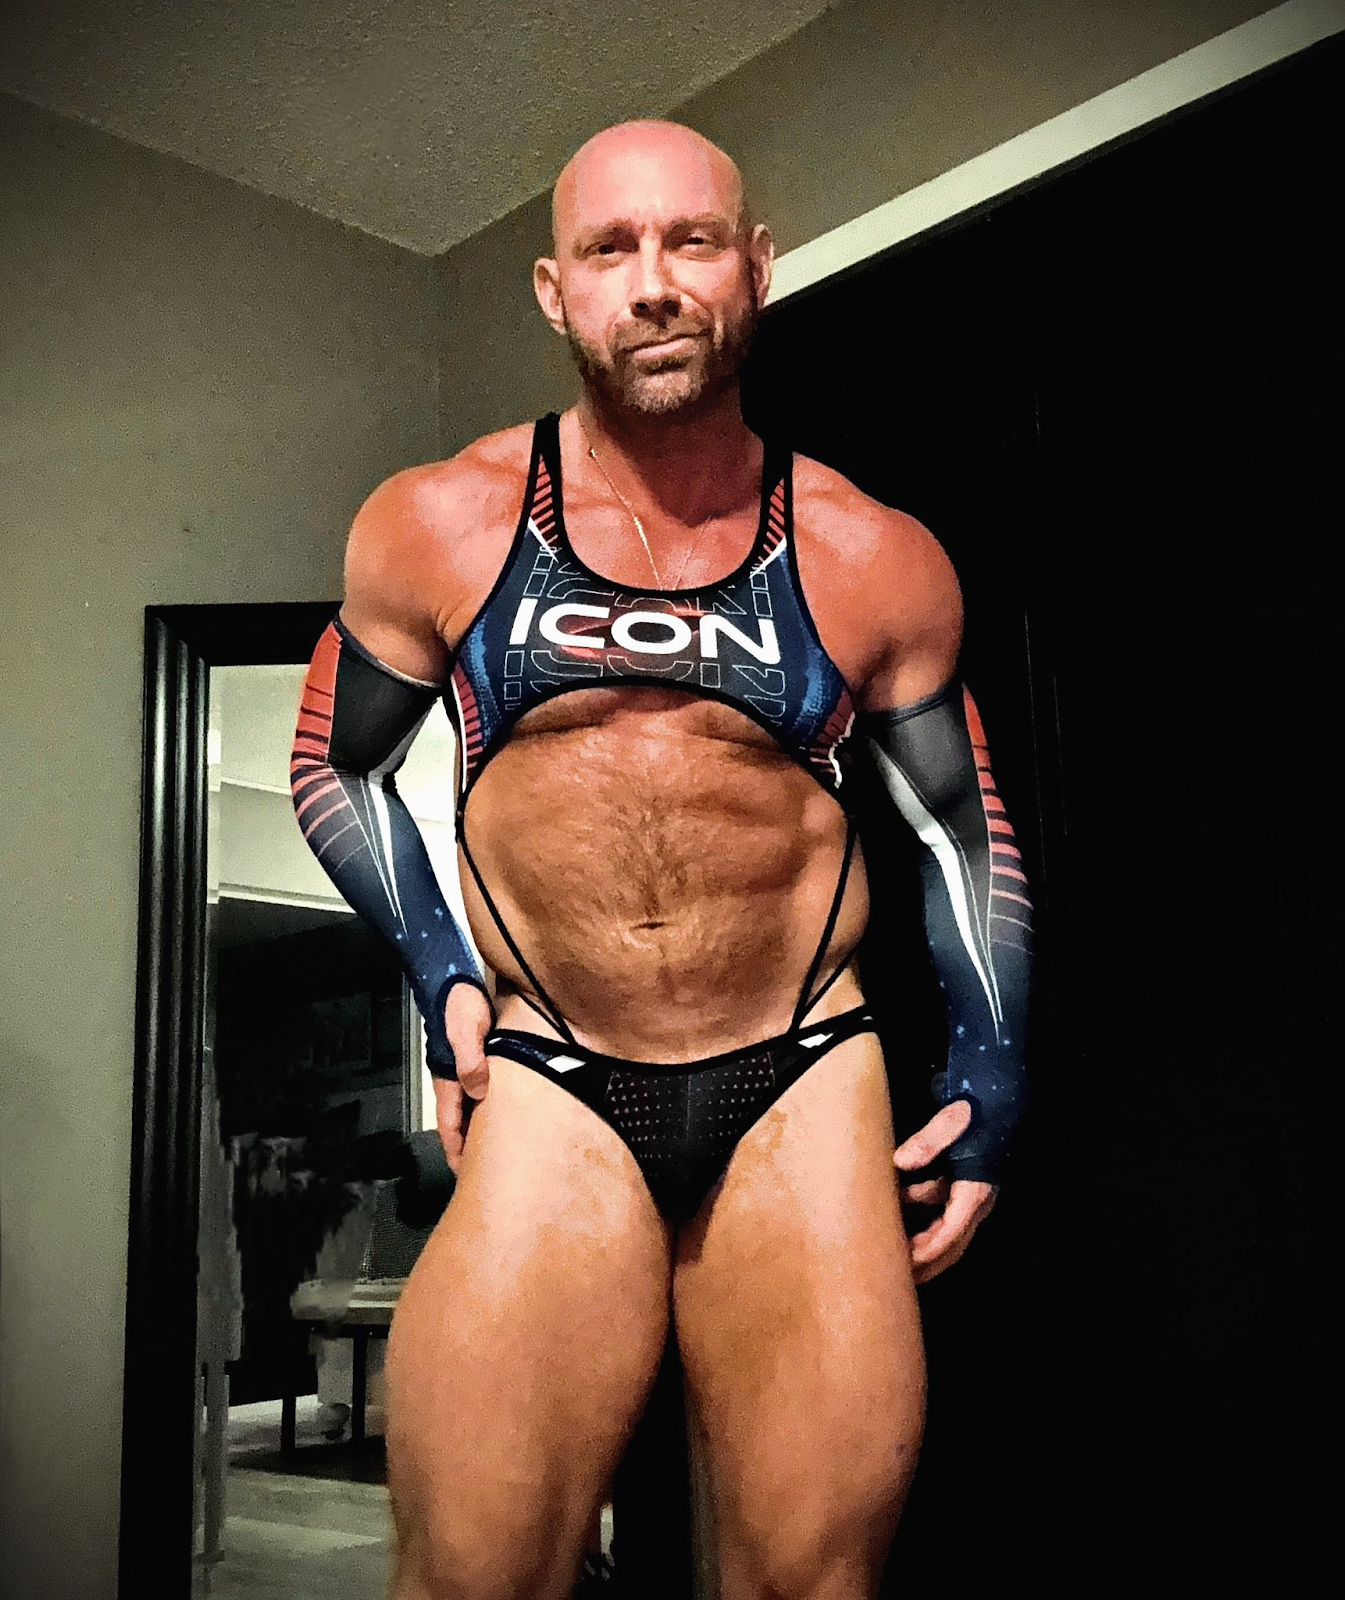 Killian Knox wearing skin tight fetish gear and panties with the words icon on his crop top taking selfies